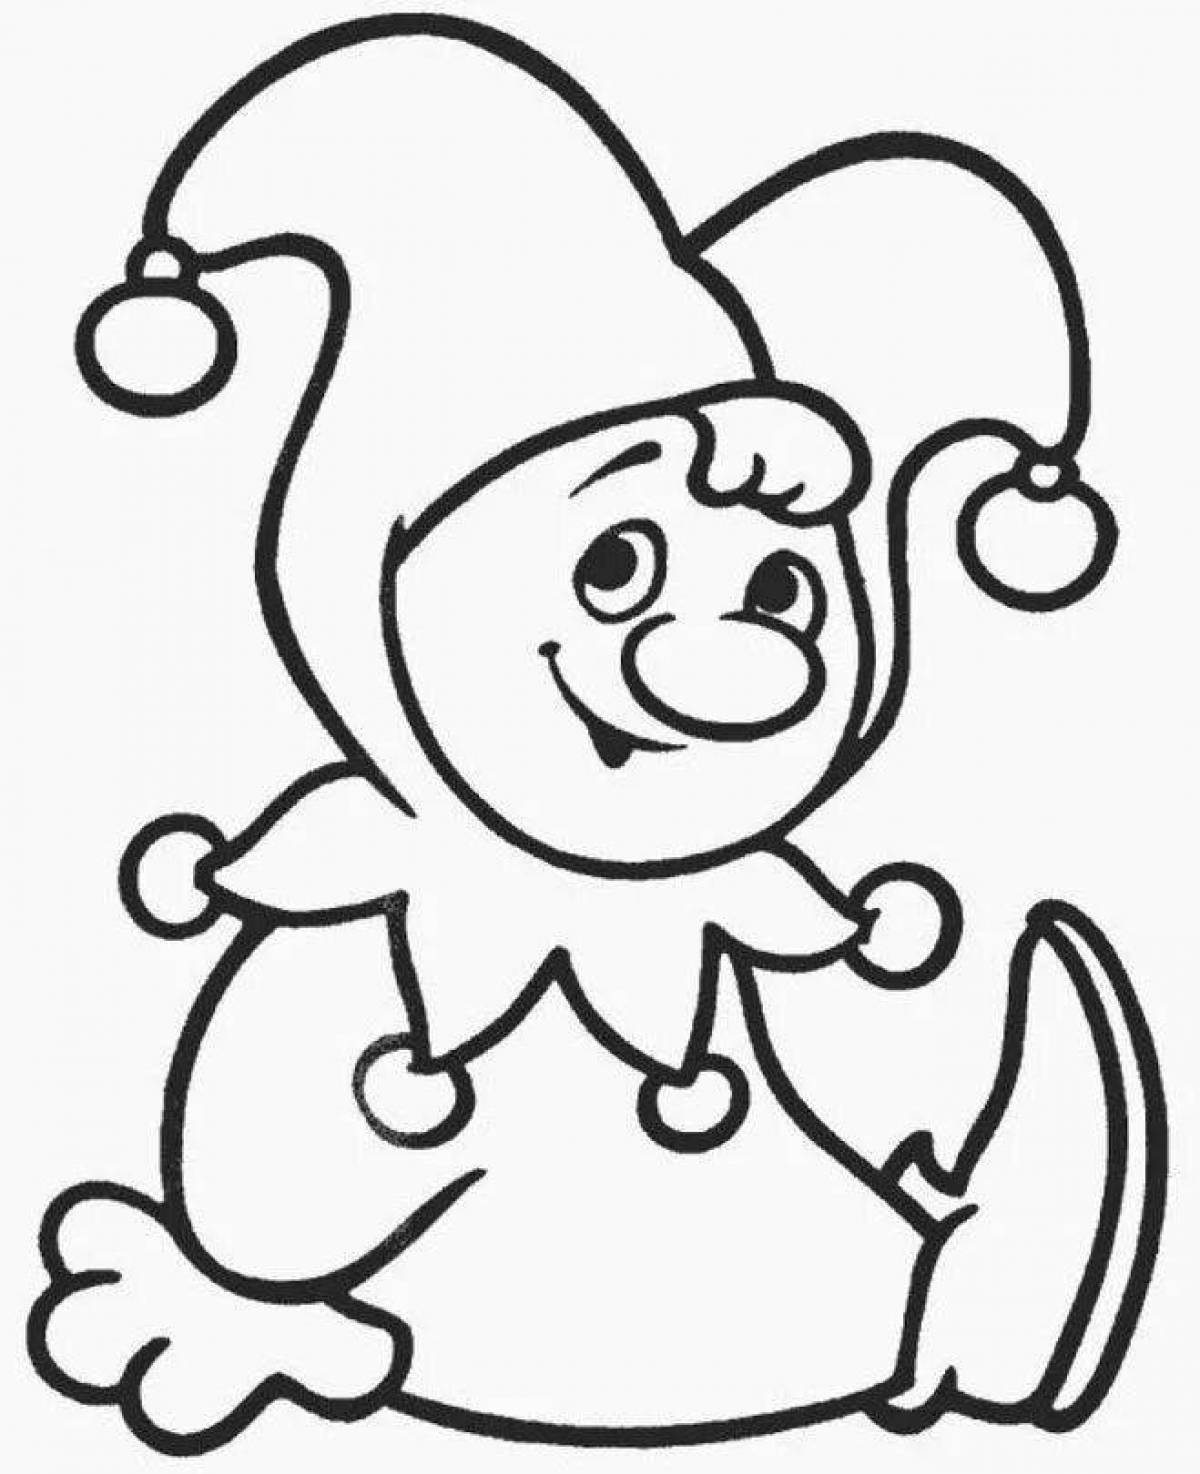 Outlandish jester coloring page